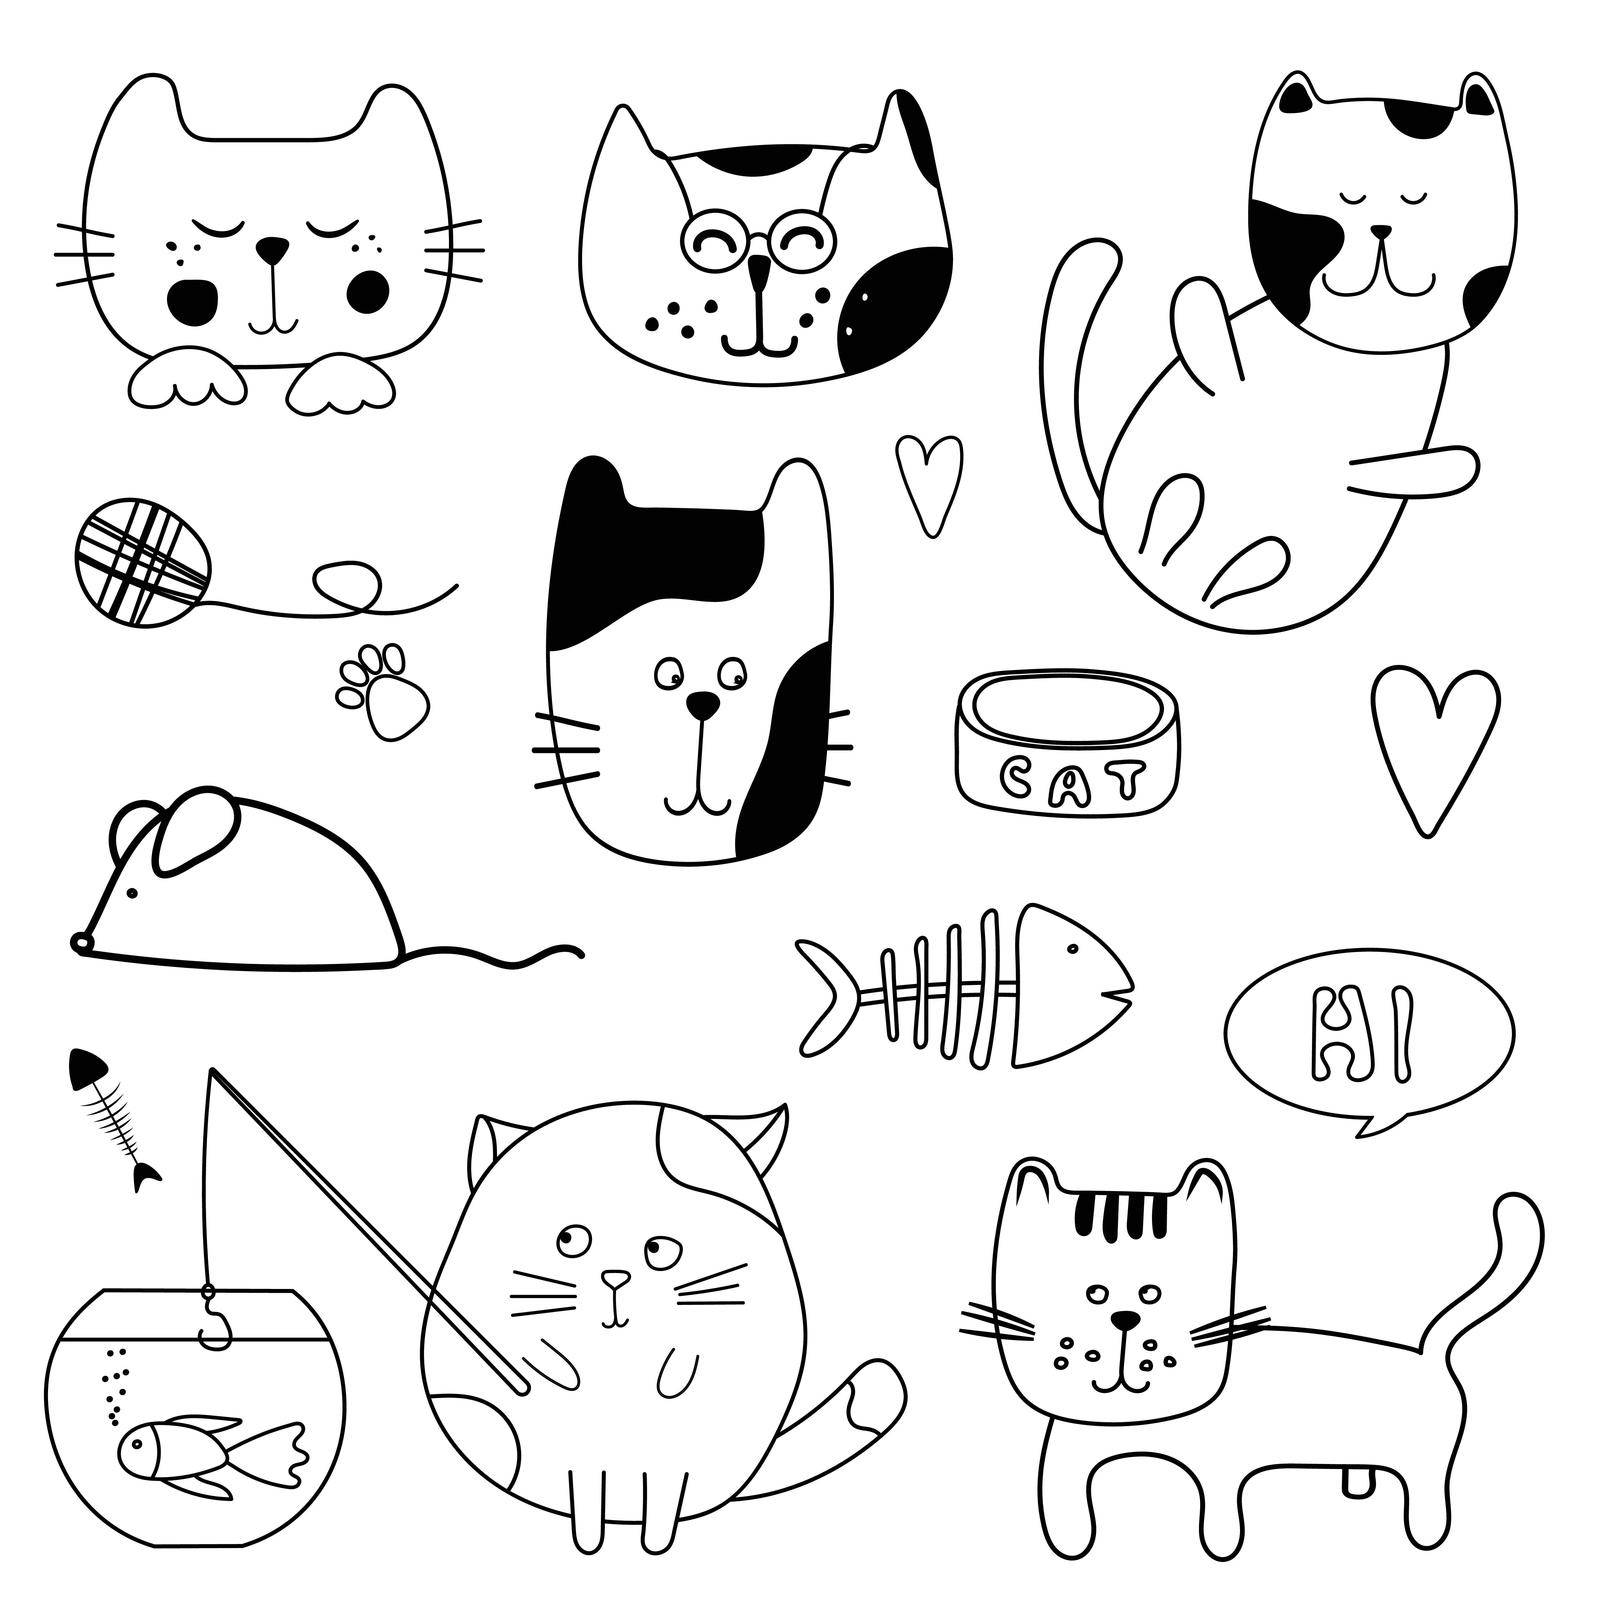 Cute kitty cats cartoon design set with different hair color and stripes. Collection of feline animals kitten drawings